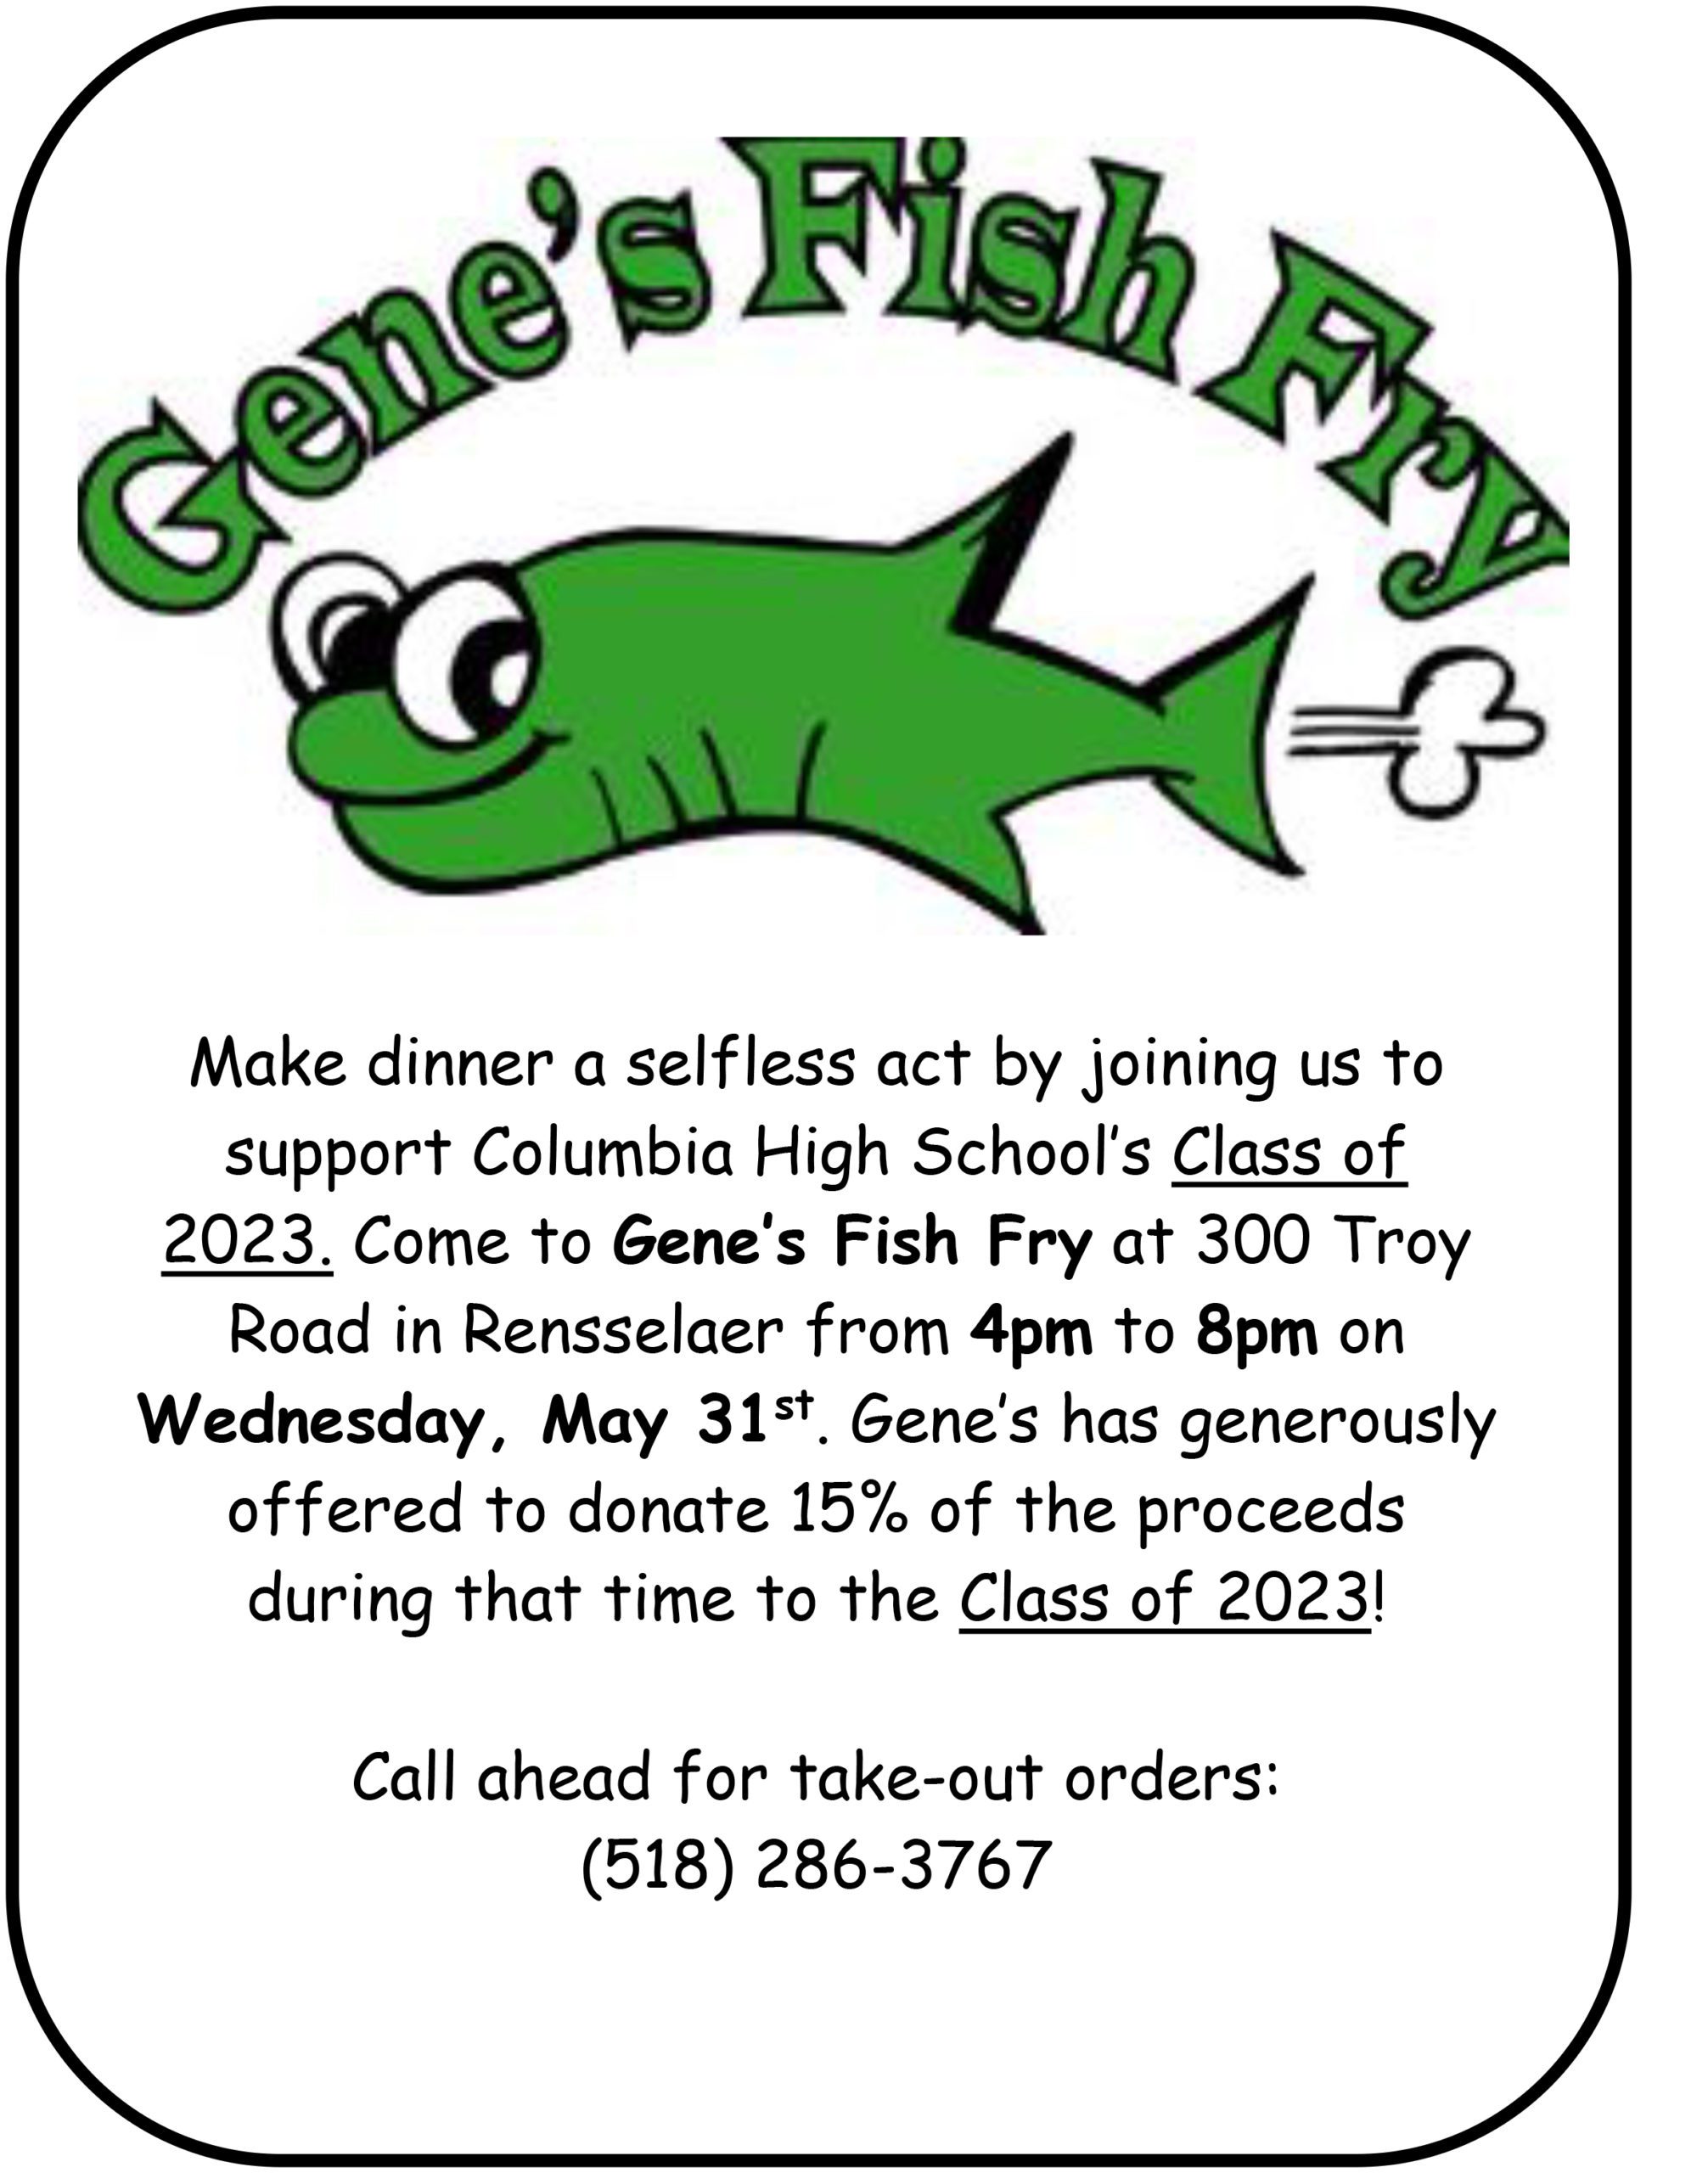 Gene's Fish Fry Dine to Donate flier